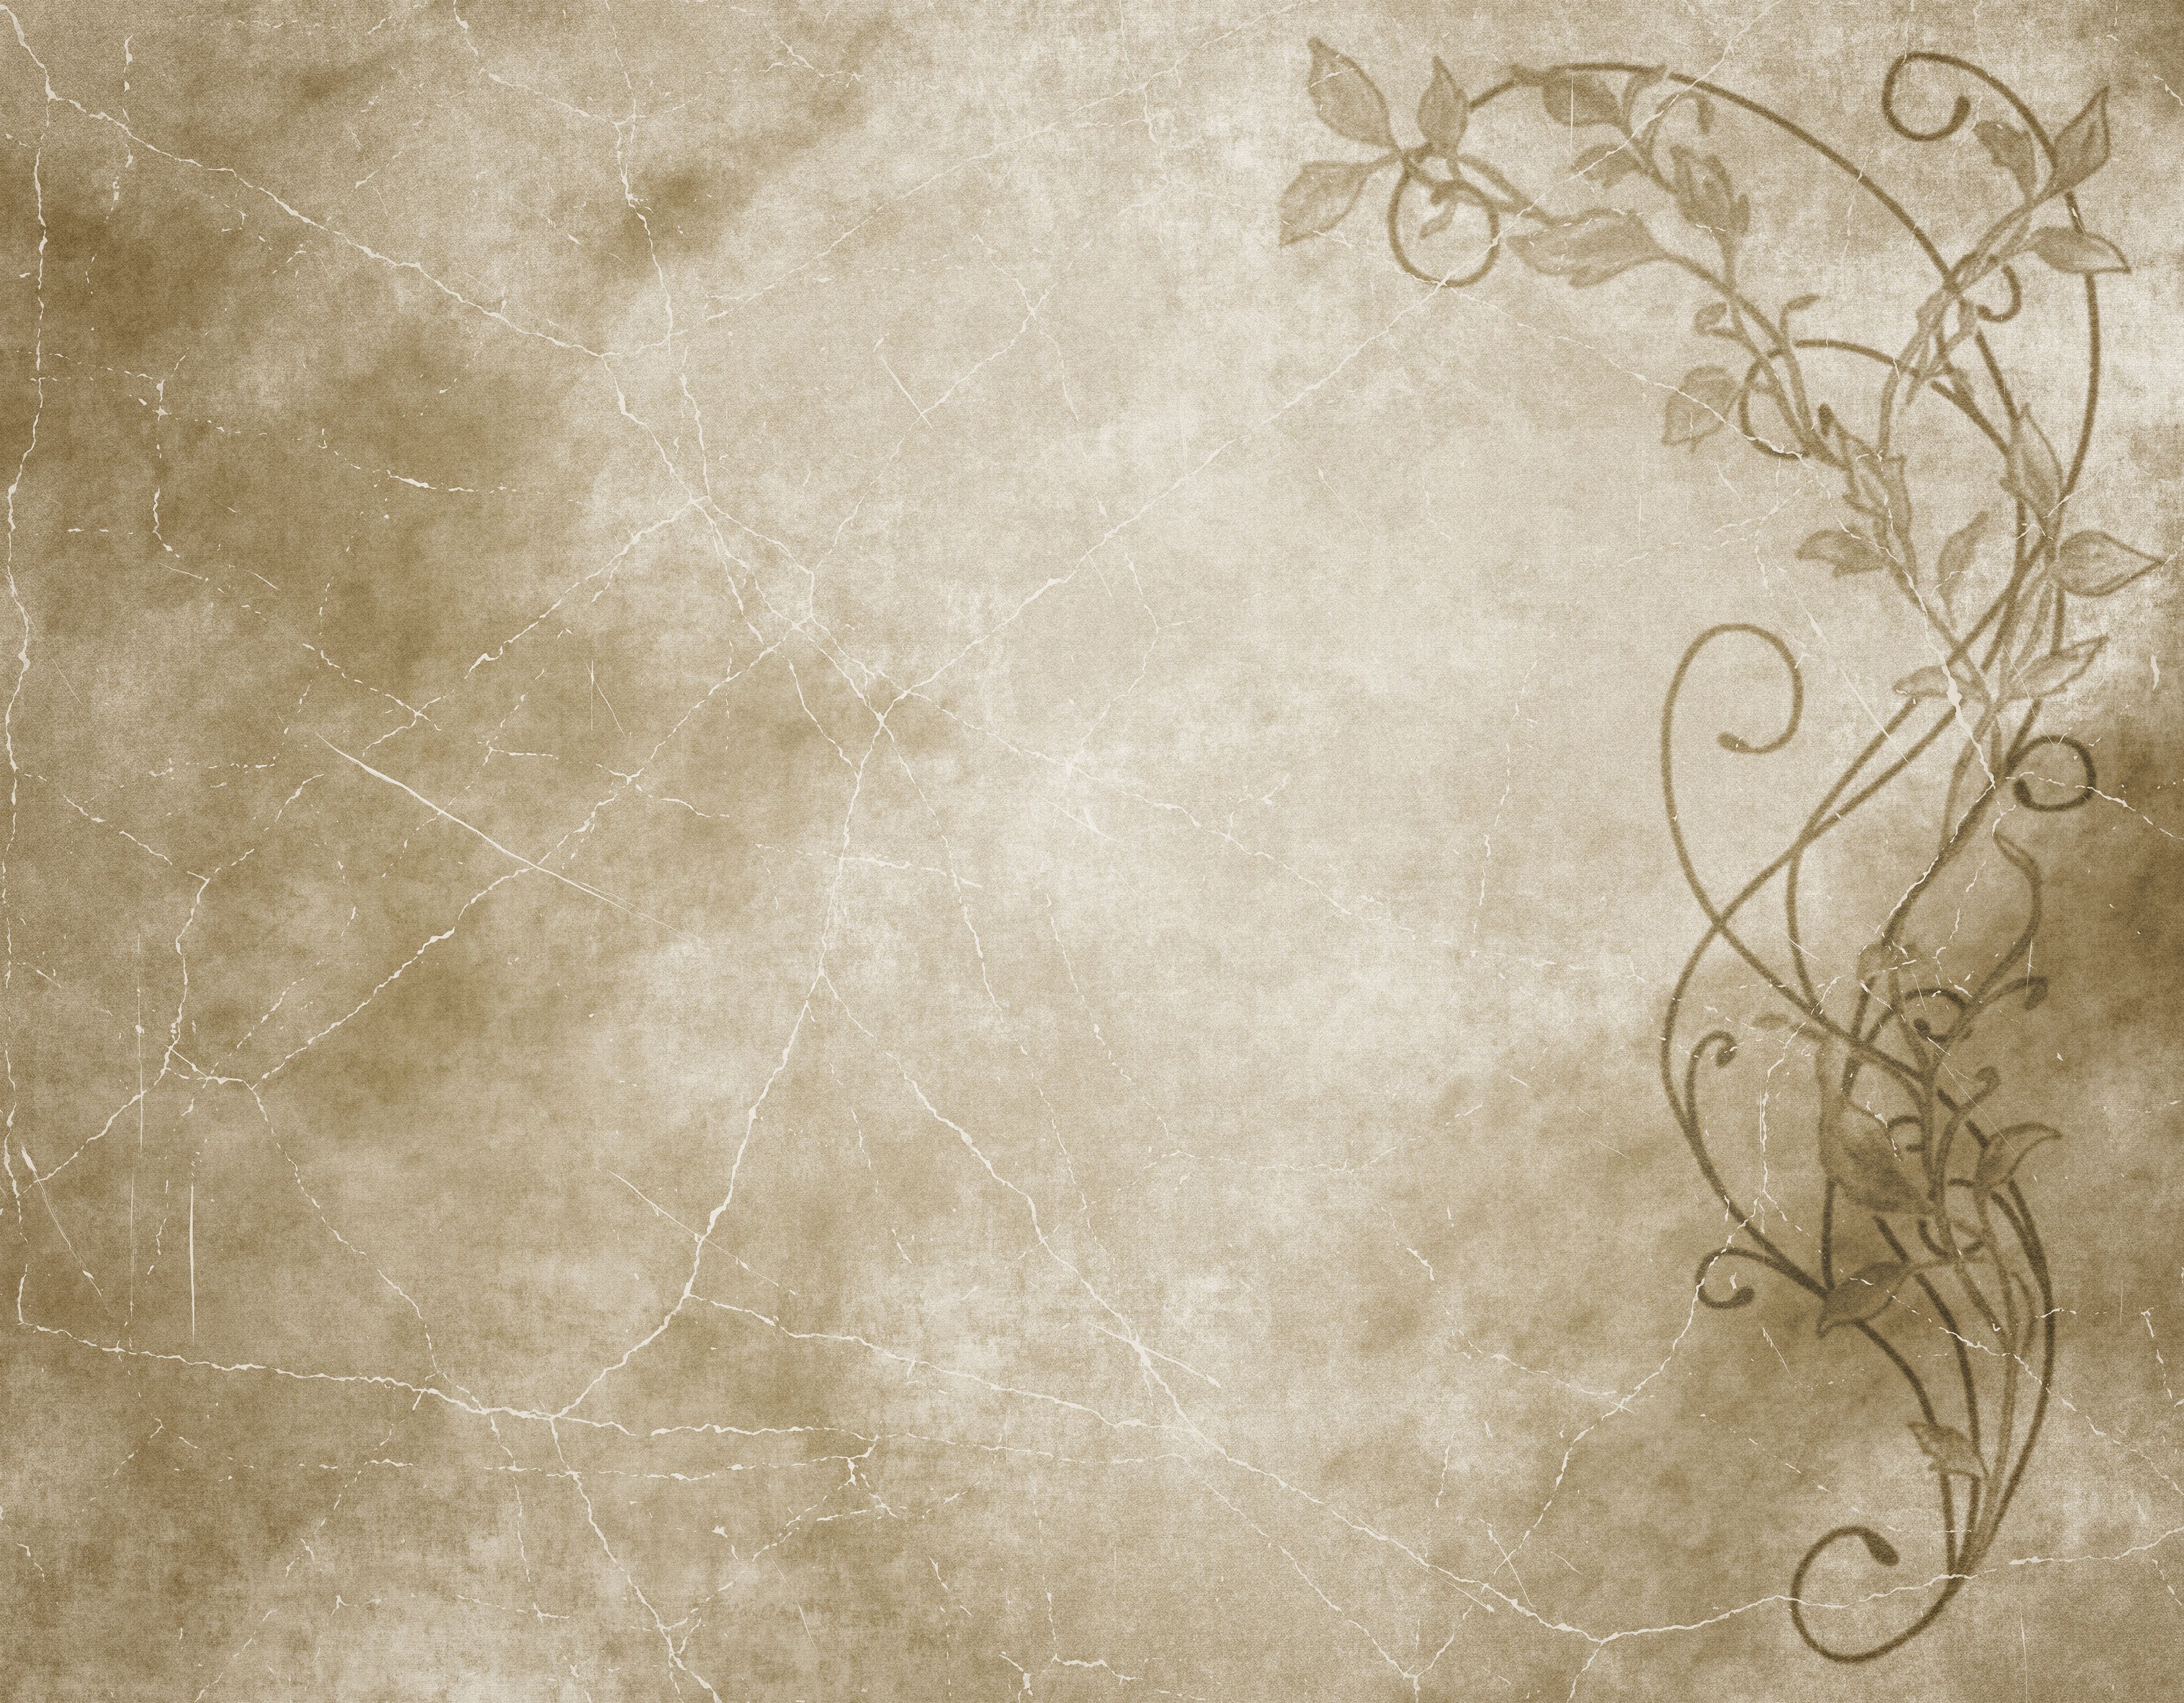 Free Old Paper Textures and Parchment Paper Backgrounds www